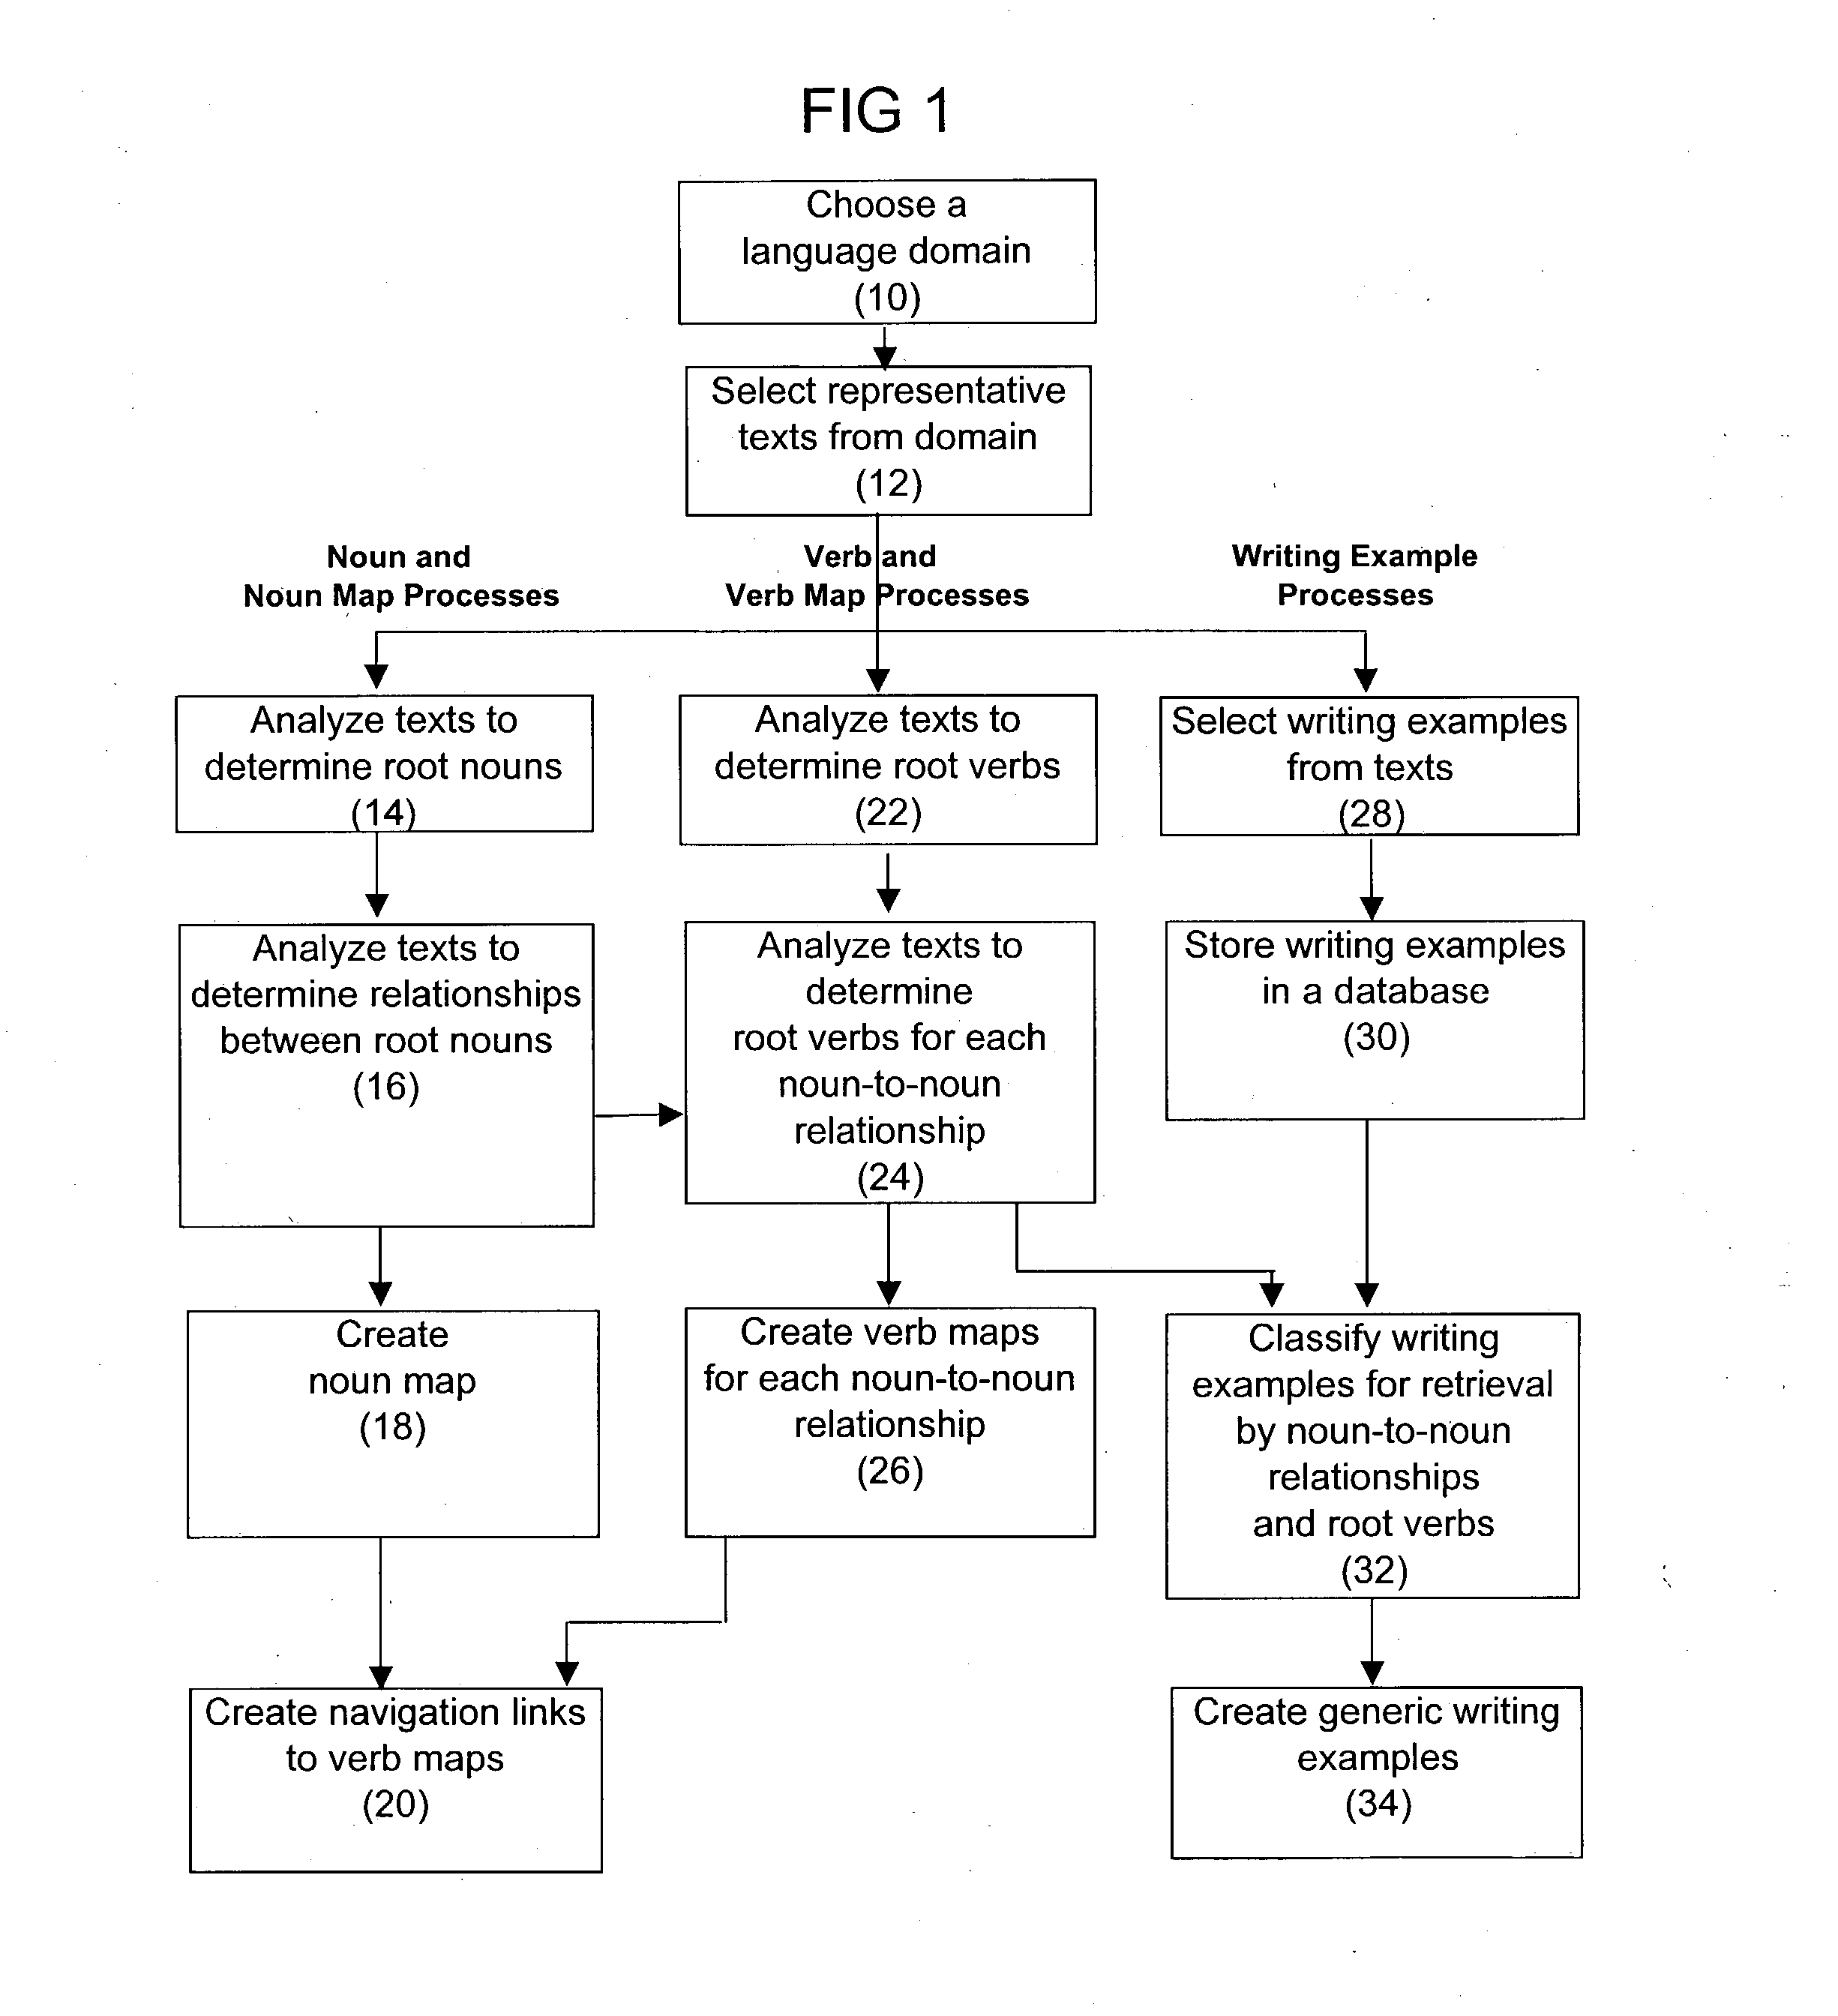 Method for classifying and accessing writing composition examples